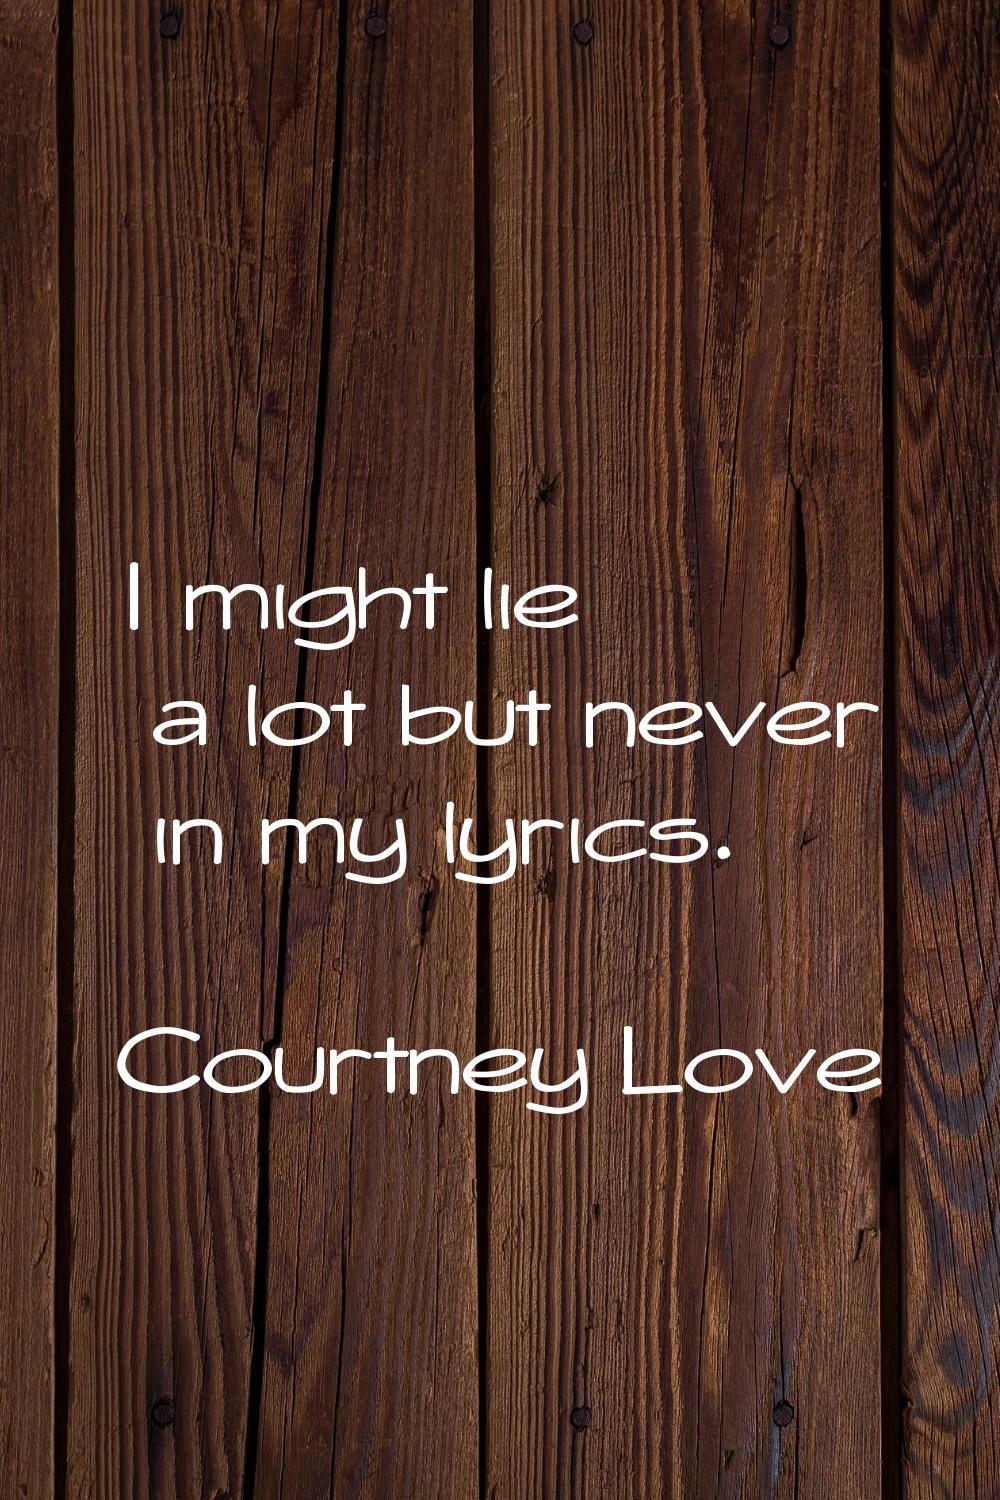 I might lie a lot but never in my lyrics.